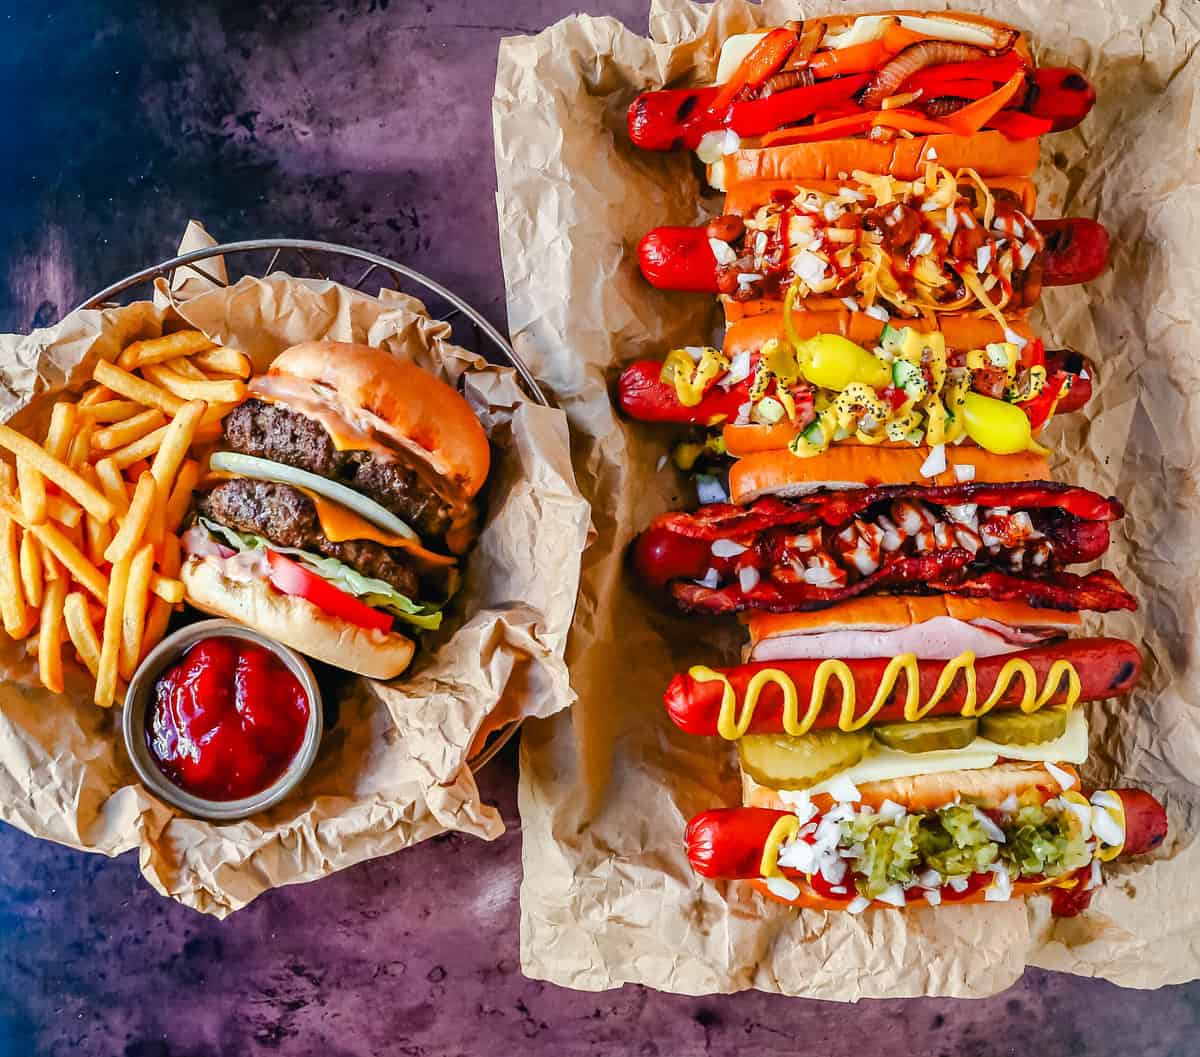 Gourmet Hot Dogs with Healthy Colorful Toppings